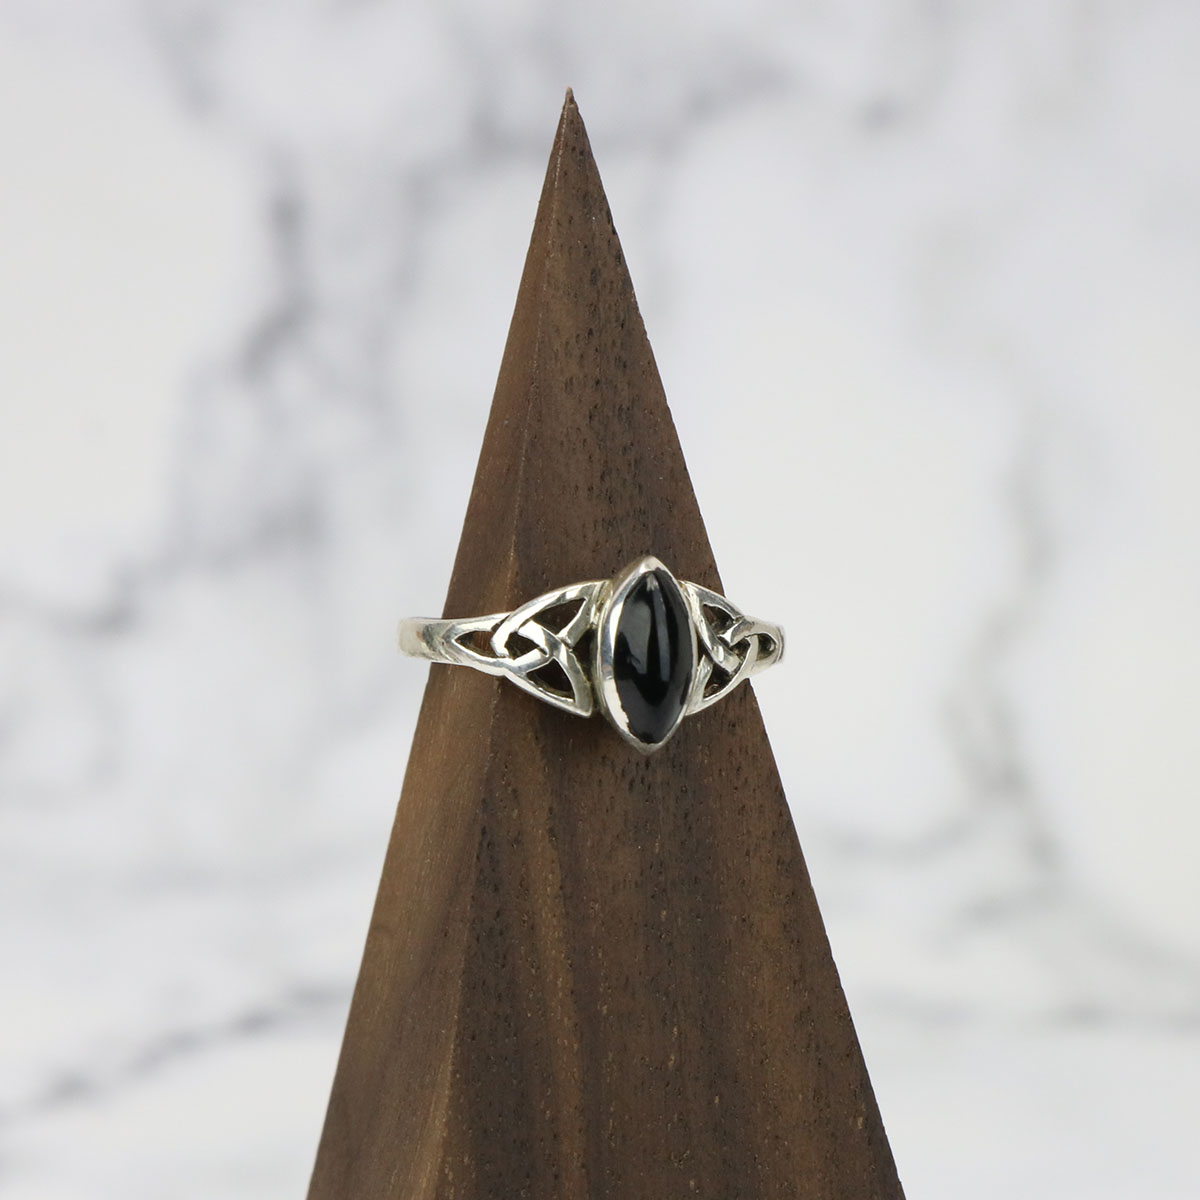 Marquise Simulated Black Onyx Celtic Triquetra Knot Ring Sterling Silver Band Sizes 5-9 